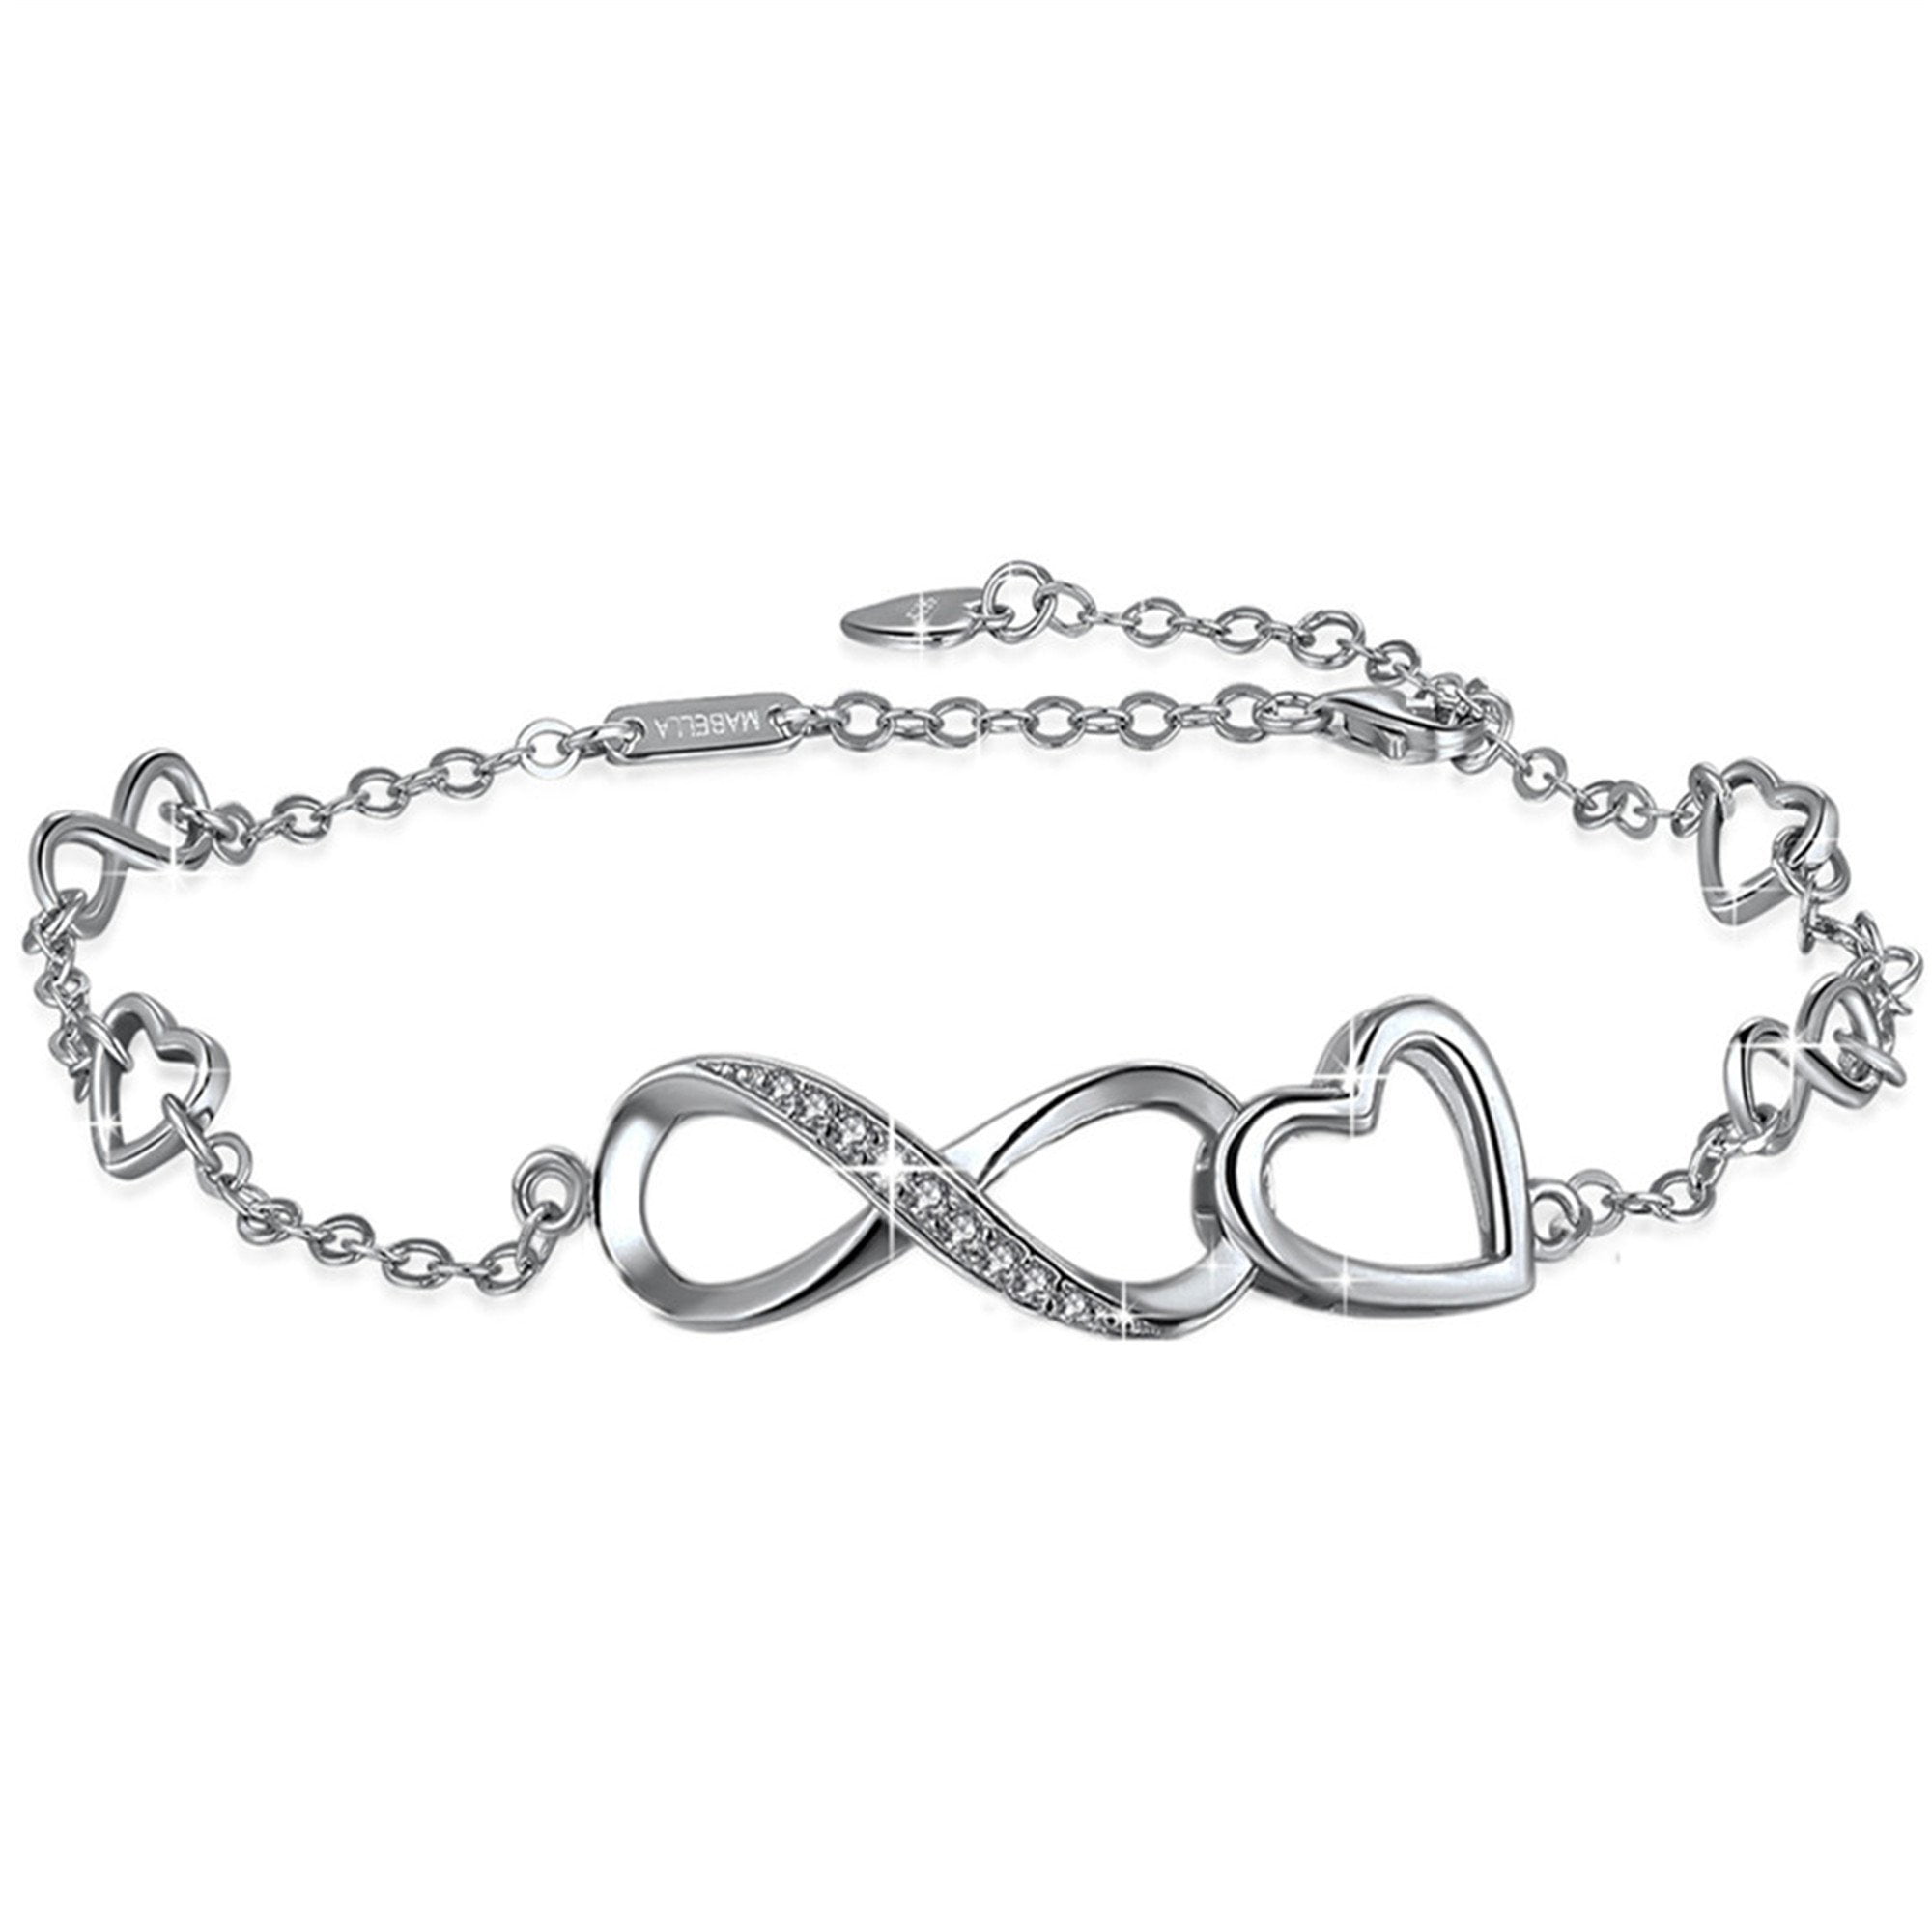 Fashion Nice Women Summer Gold/Silver Layered Chain Infinity Charm Anklets Bracelet